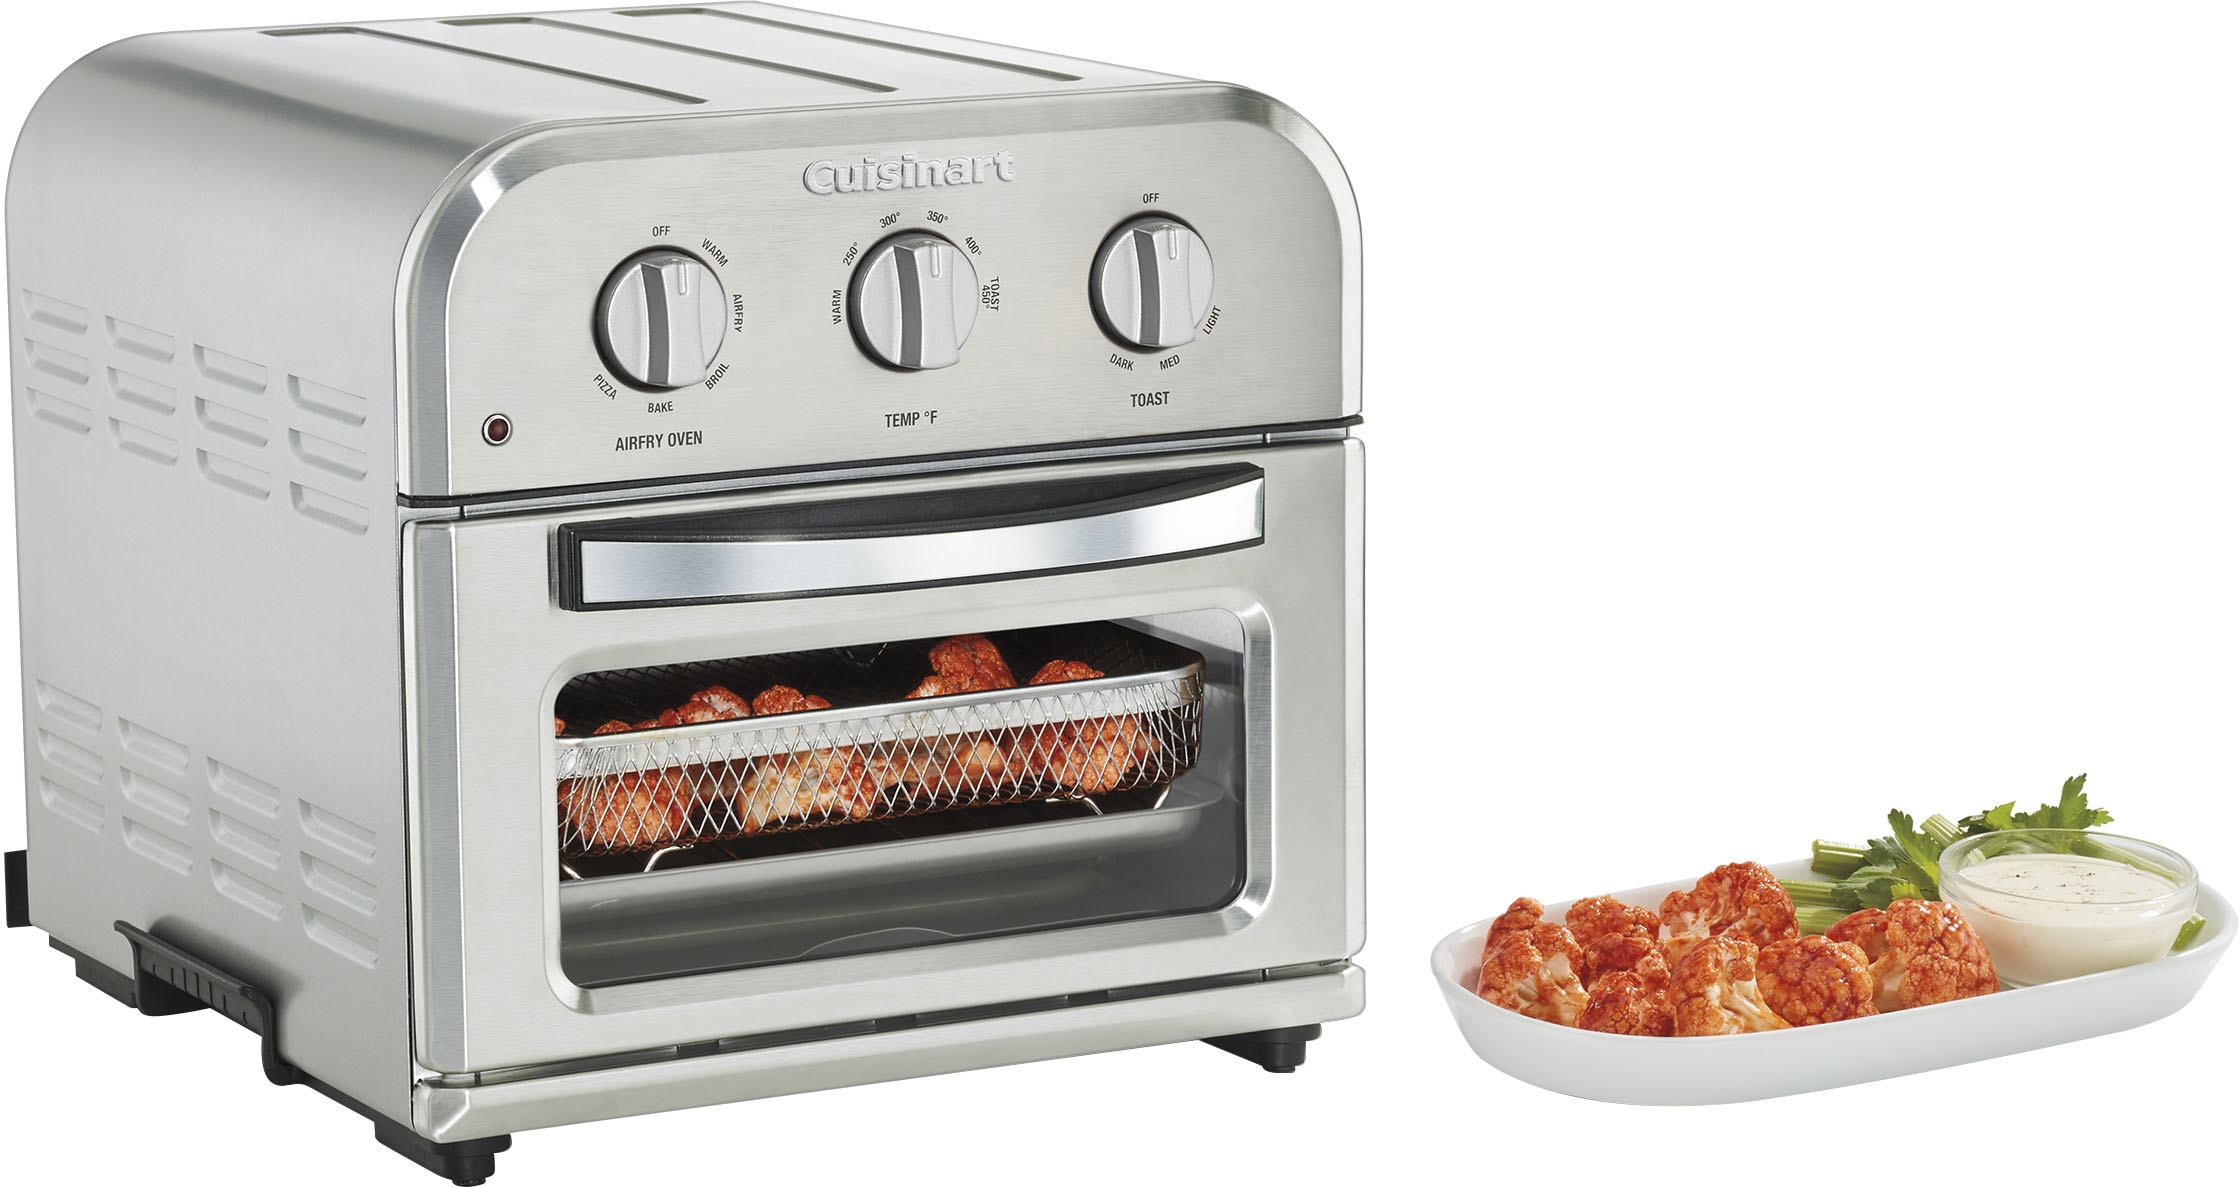 💥Gourmia Digital Stainless Steel Toaster Oven Air Fryer - Stainless Stee